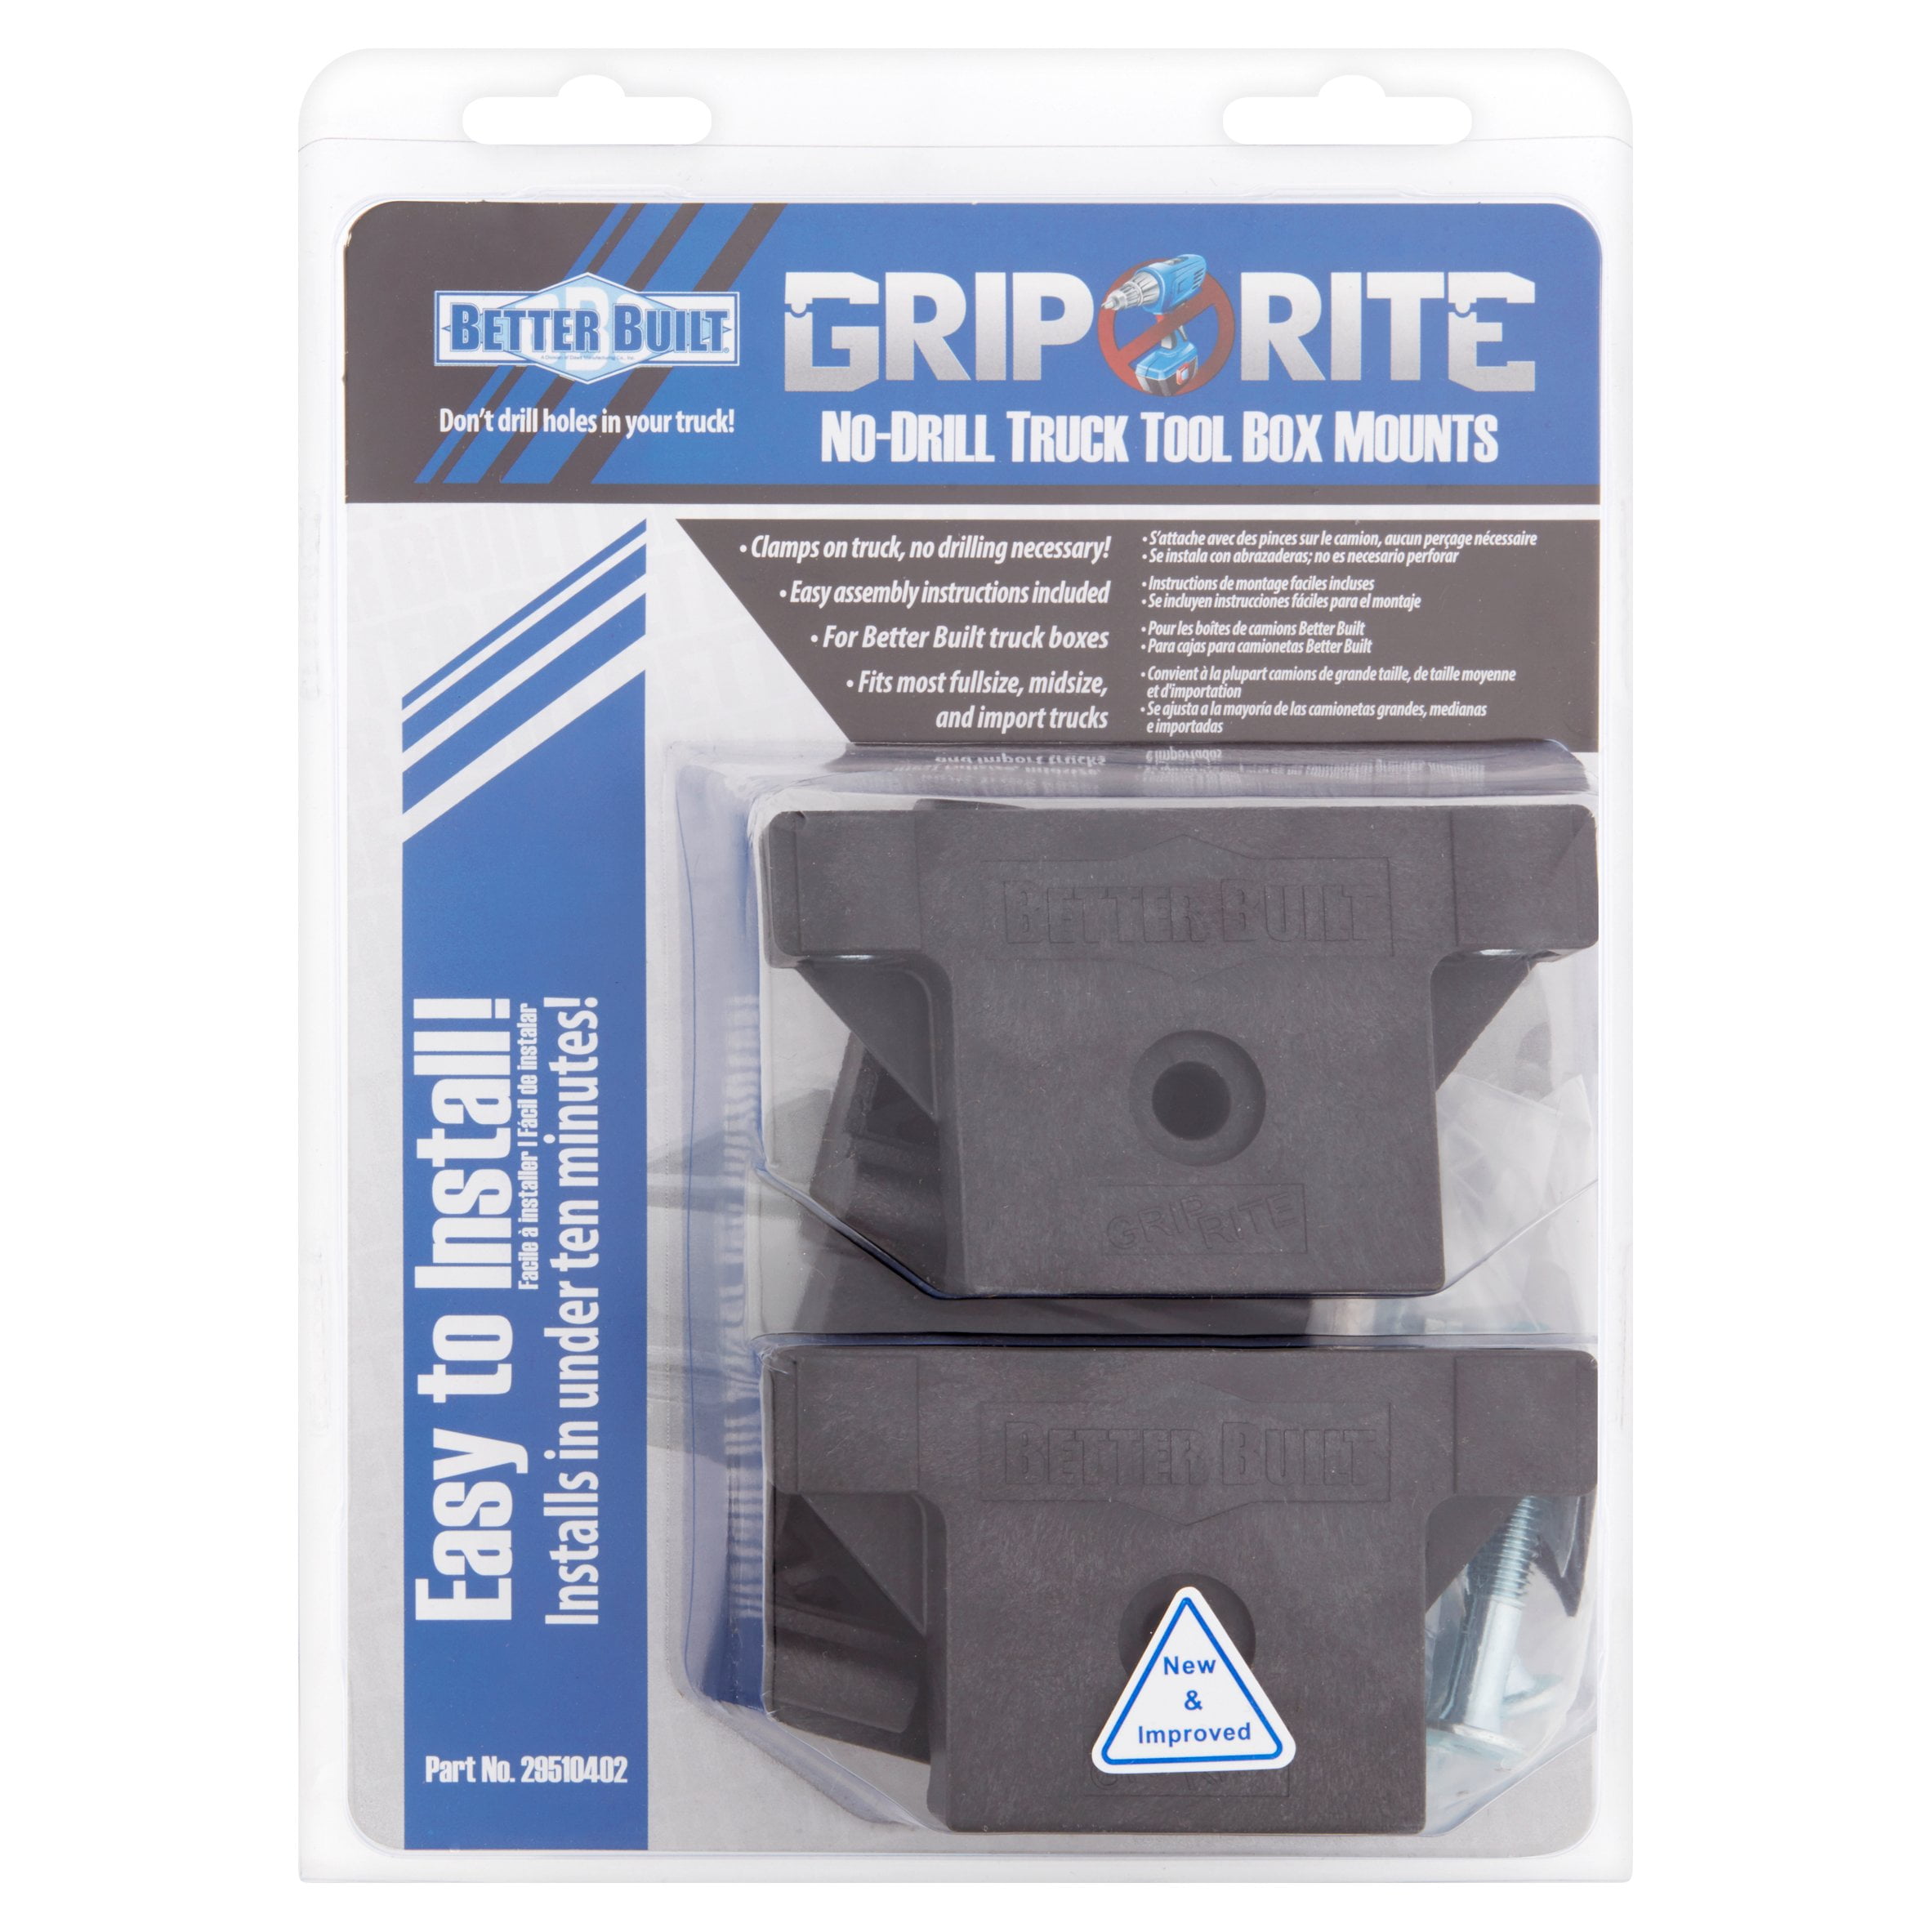 Grip Rite No Drill Truck Tool Box Mounts Review  